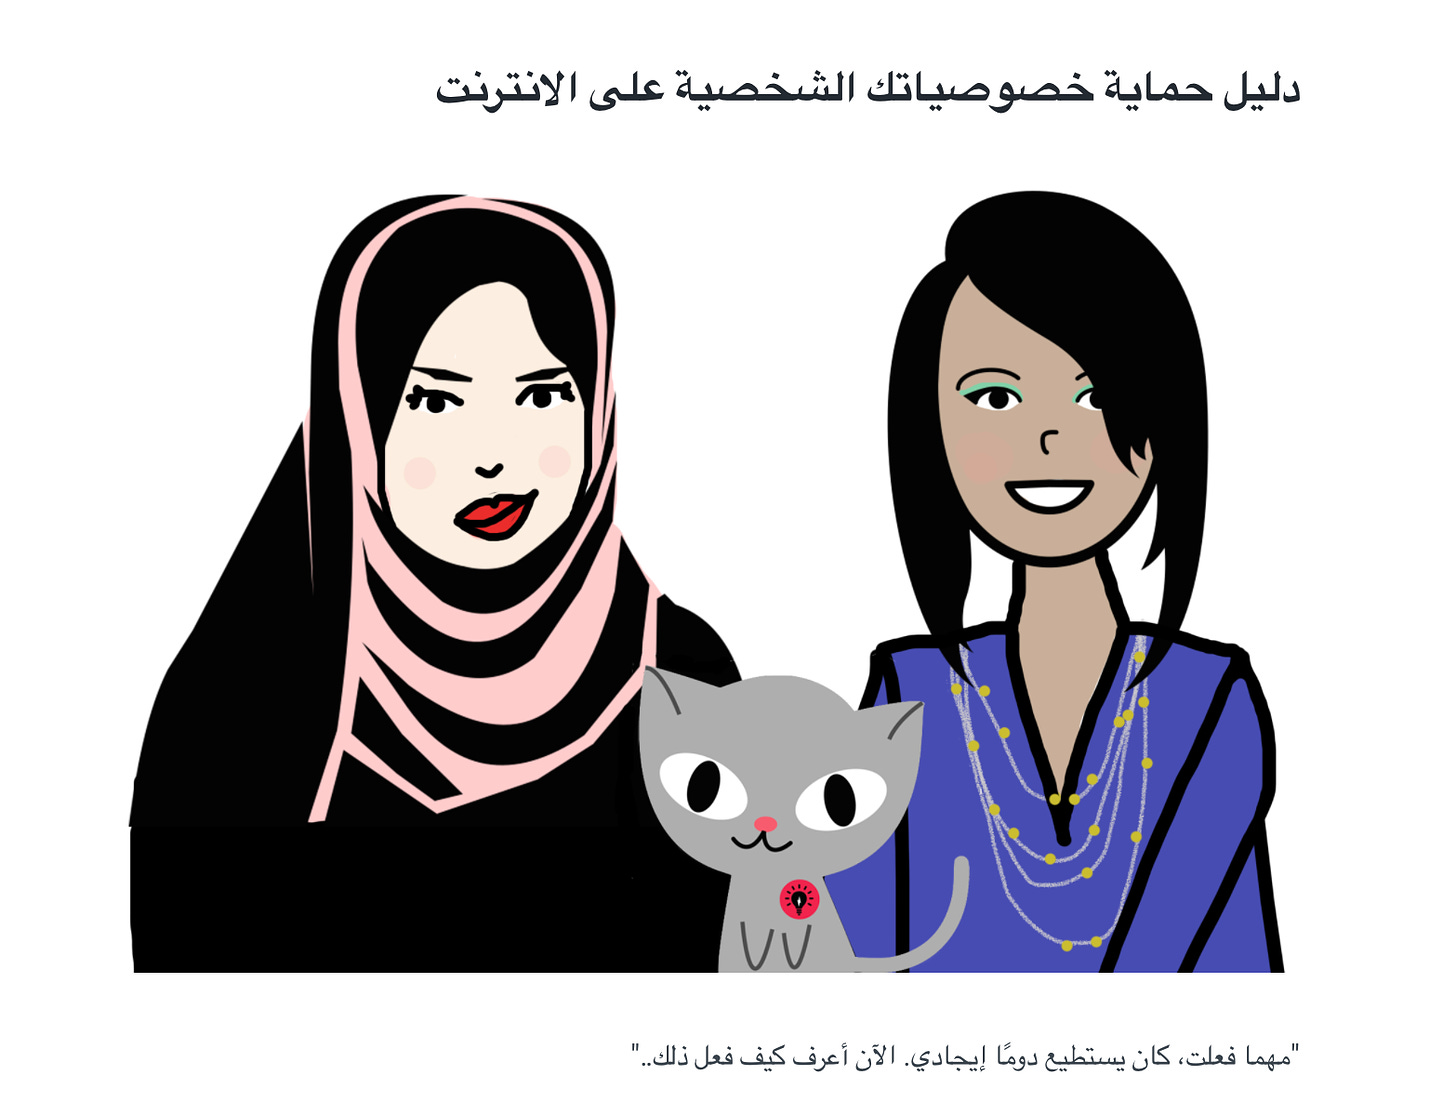 age description: This is a screen grab from the Arabic language tool kit and shows two illustrated women one wears a hijab and the other a purple dress. 